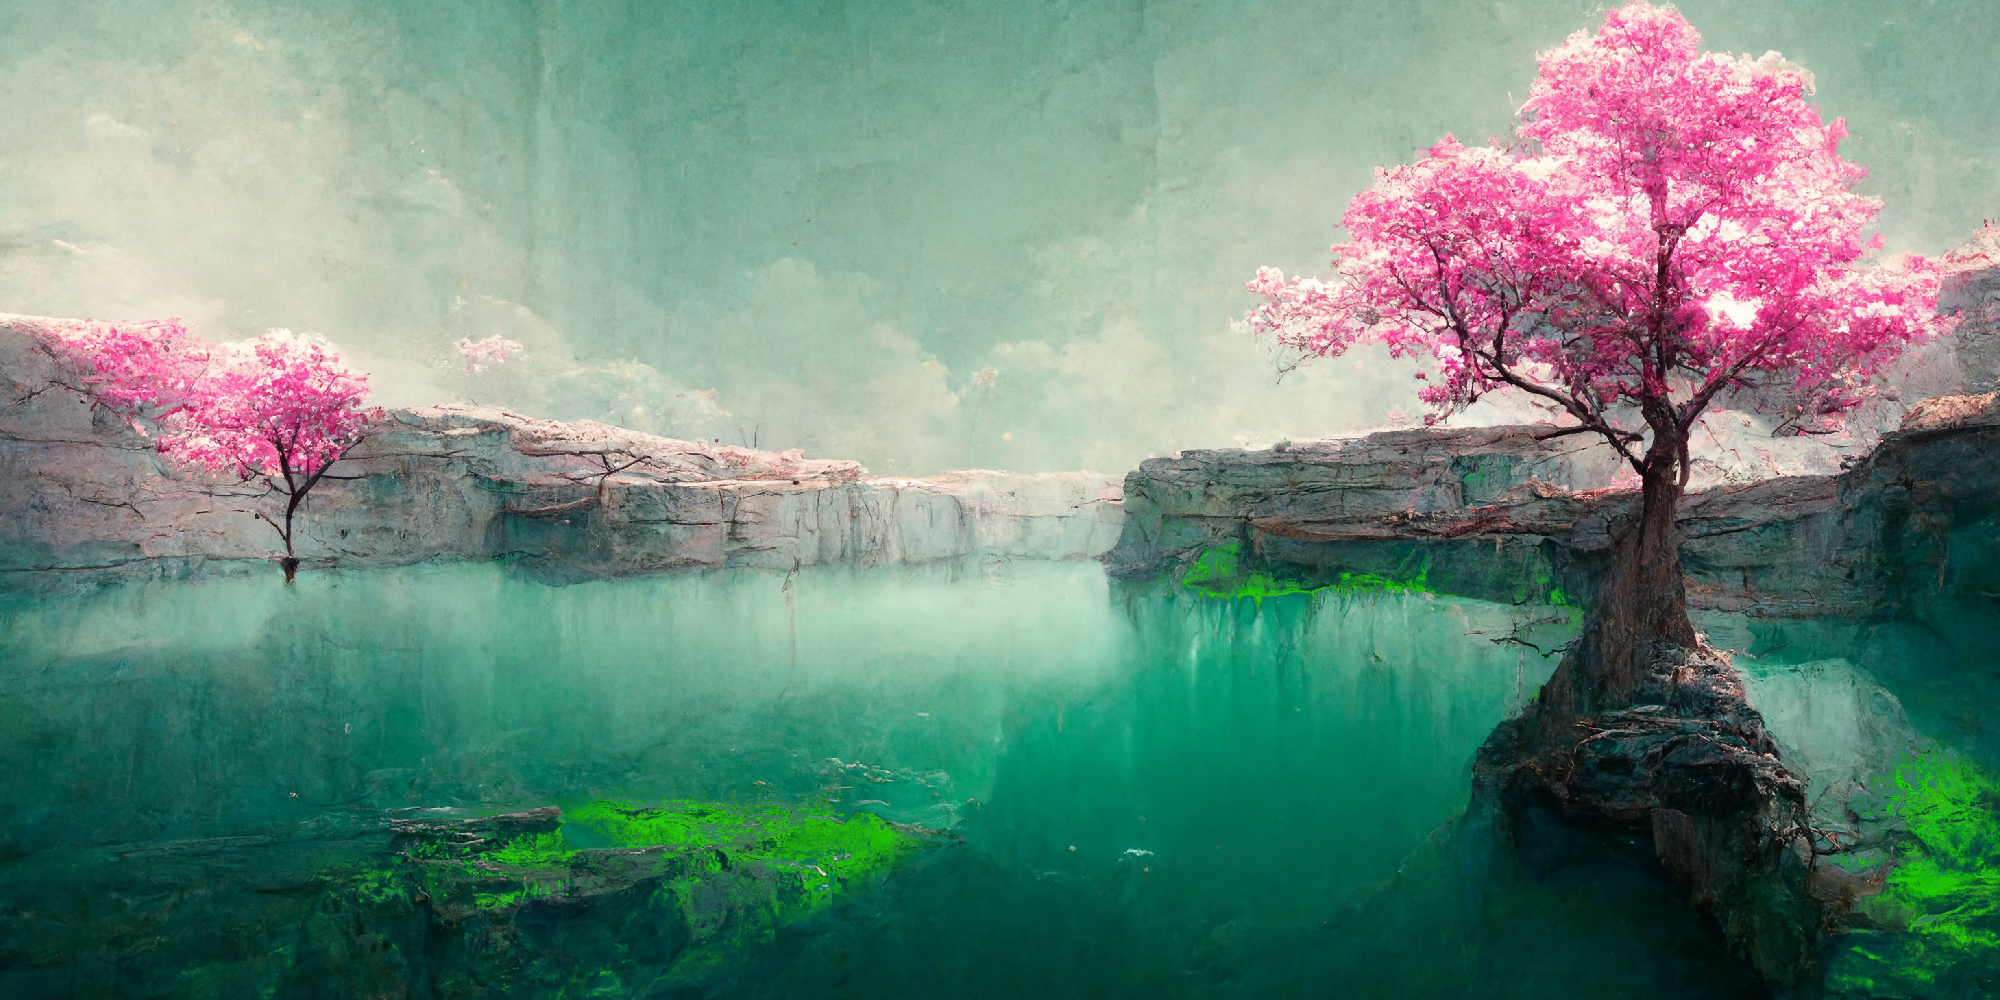 Green river flowing through canyon with pink trees on either side. Hero Image